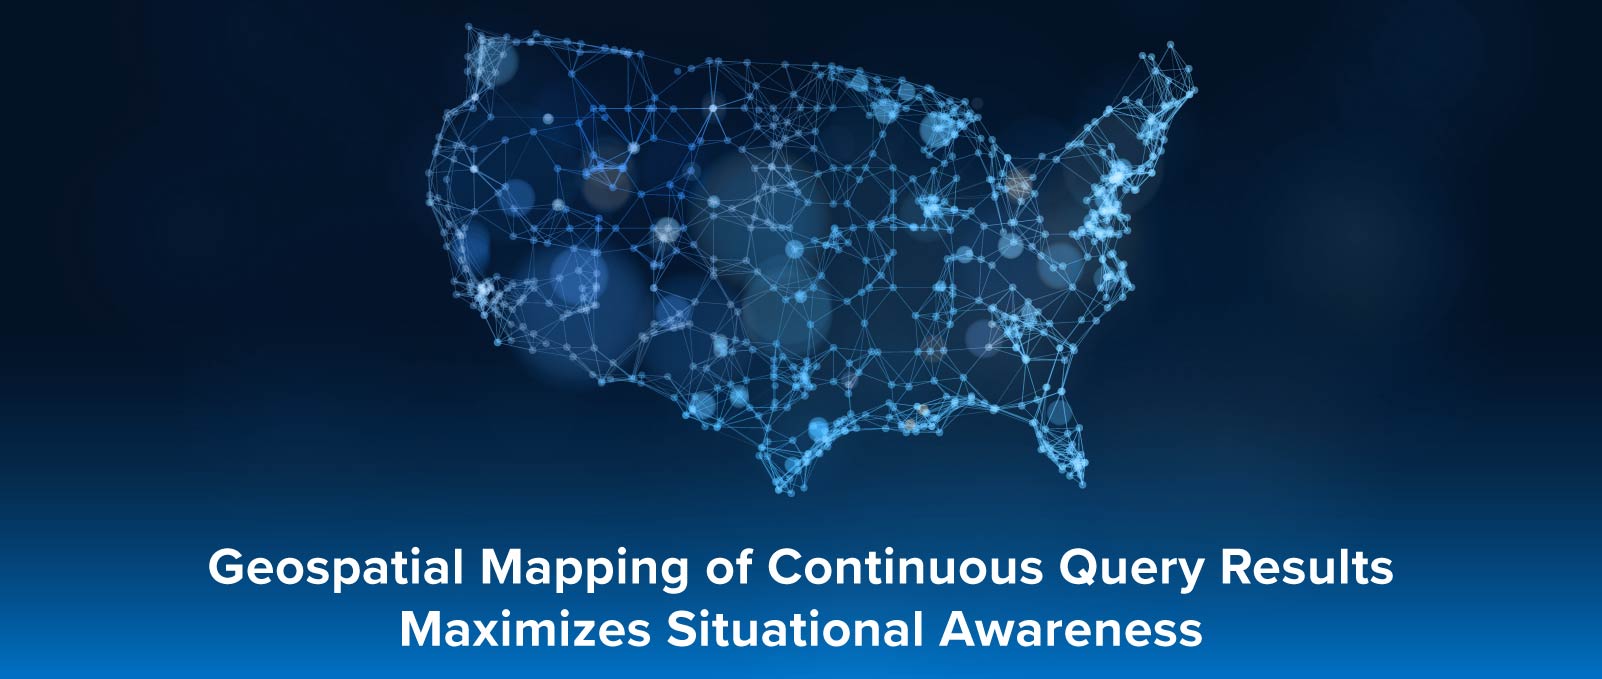 Geospatial mapping of continuous query results maximizes situational awareness.